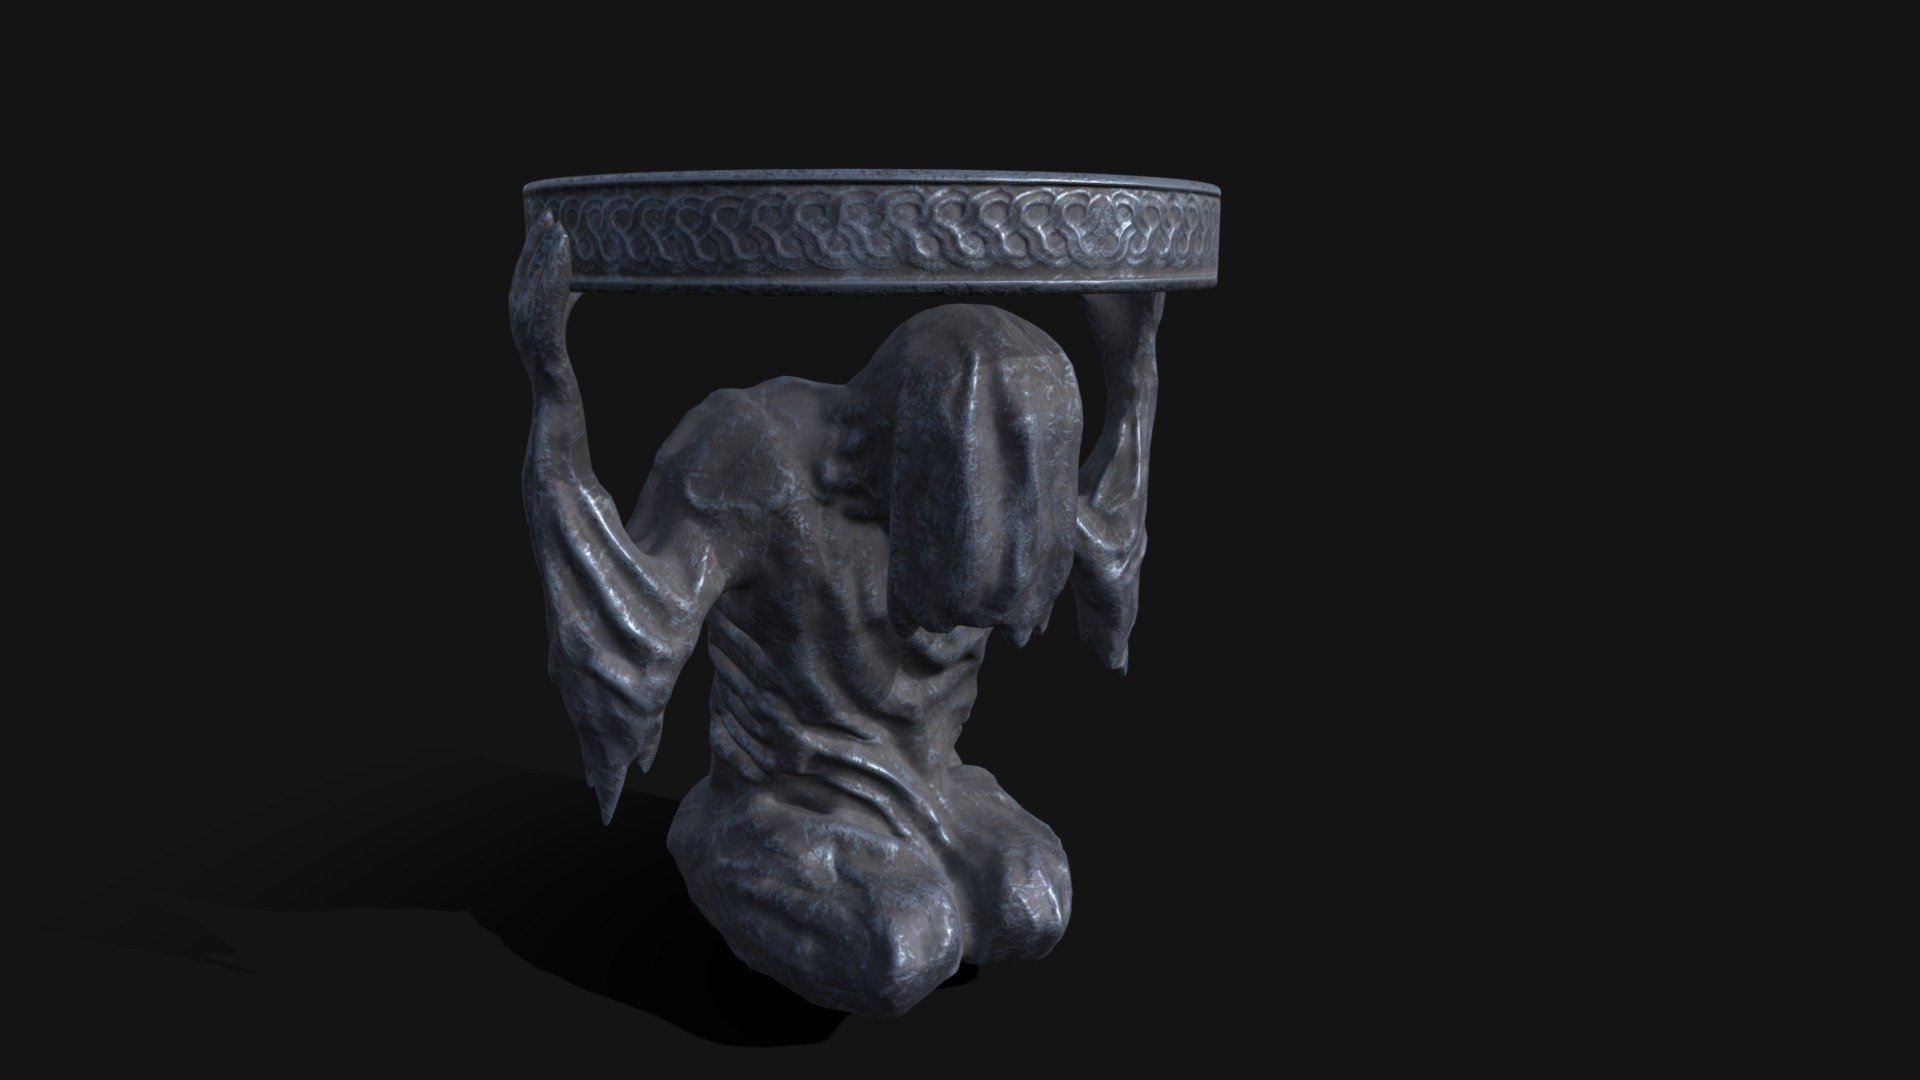 Dark Reaper Table 3D Model. This model contains the Dark Reaper Table itself 

All modeled in Maya, textured with Substance Painter.

The model was built to scale and is UV unwrapped properly

⦁   24718 tris. 

⦁   Contains: .FBX .OBJ and .DAE

⦁   Model has clean topology. No Ngons.

⦁   Built to scale

⦁   Unwrapped UV Map

⦁   4K Texture set

⦁   High quality details

⦁   Based on real life references

⦁   Renders done in Marmoset Toolbag

Polycount: 

Verts 12363

Edges 24762

Faces 12403

Tris 24718

If you have any questions please feel free to ask me 3d model